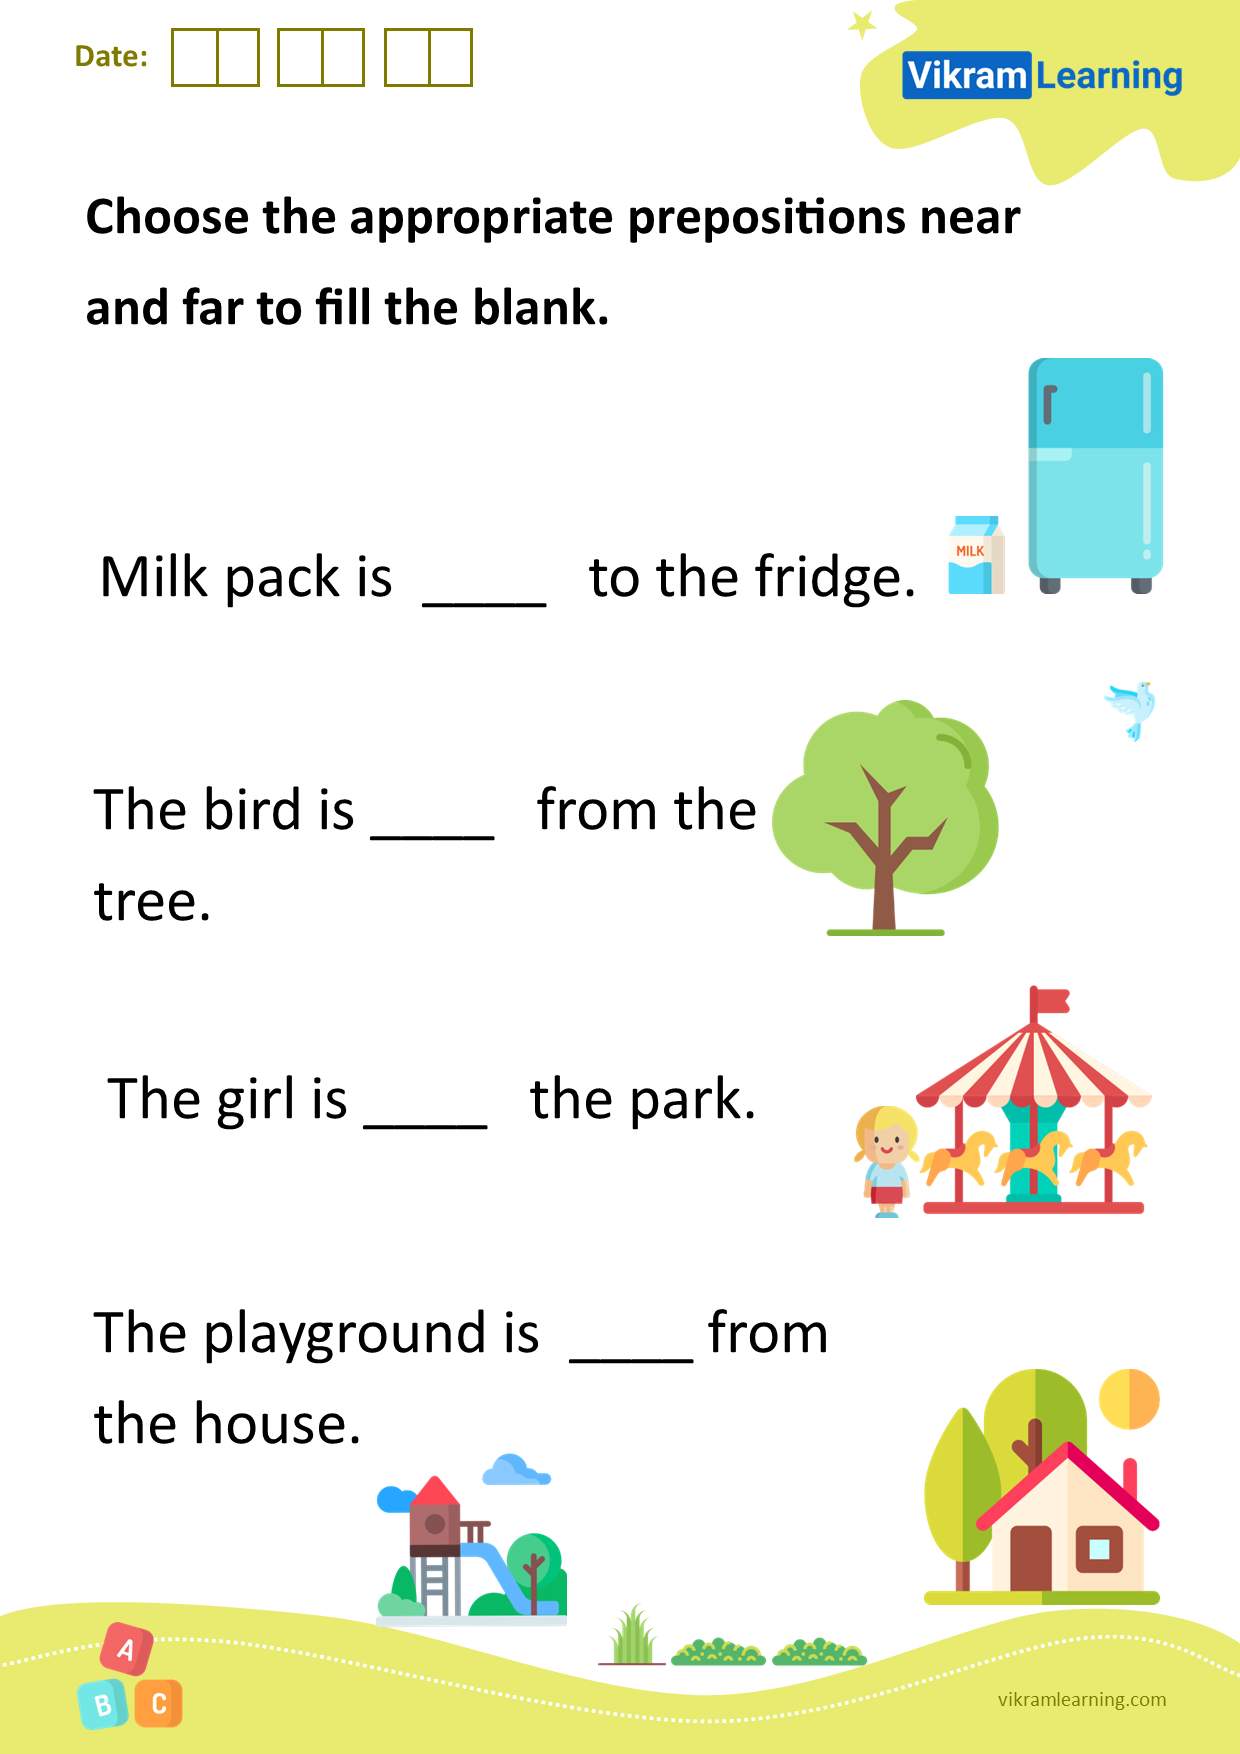 download-choose-the-appropriate-prepositions-near-and-far-to-fill-the-blank-worksheets